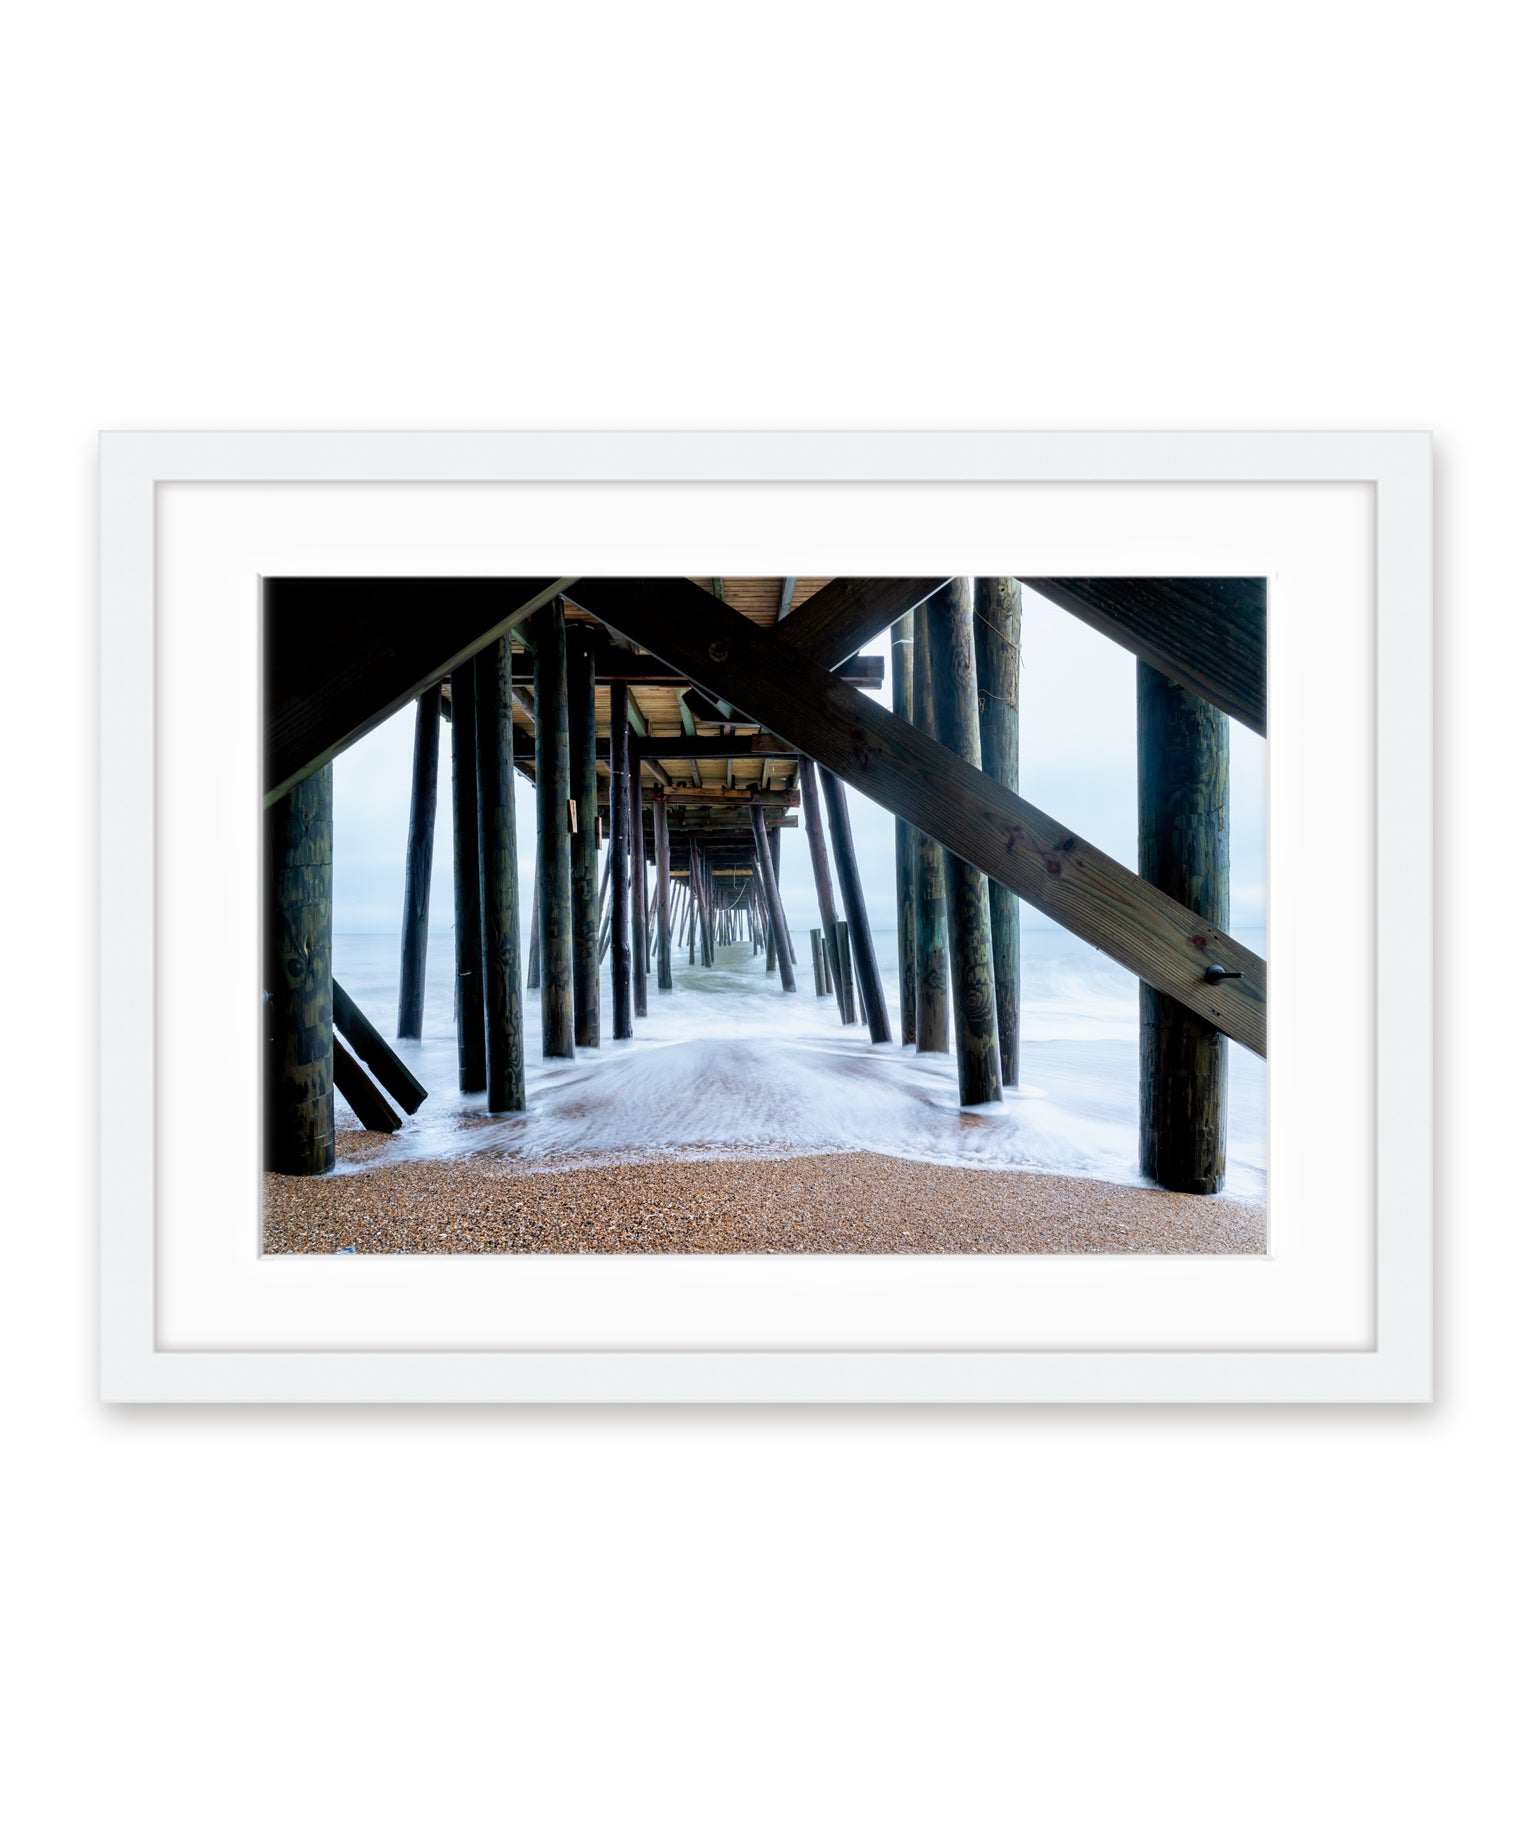 outer banks, avalon pier photograph art print by Wright and Roam, white frame